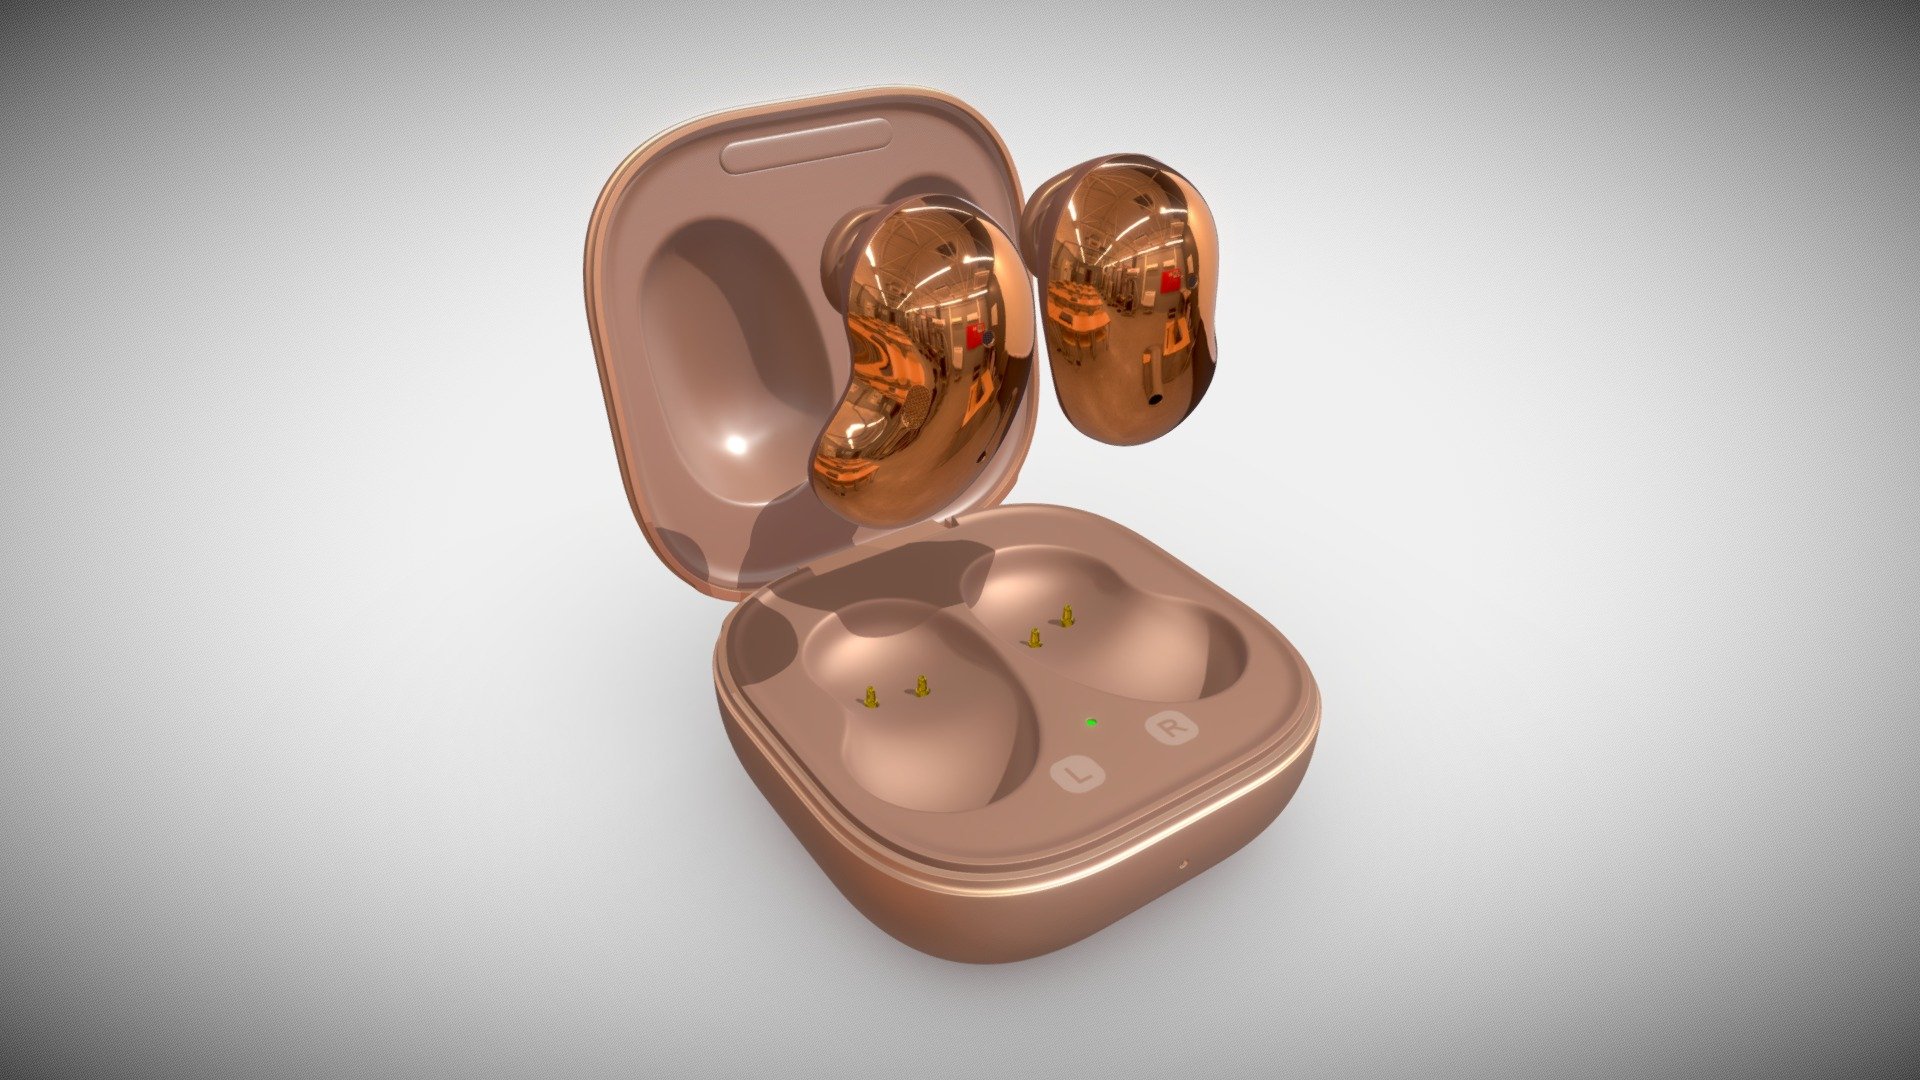 Samsung Galaxy Buds Live all colors

This set:
- 1 file obj standard
- 1 file 3ds Max 2013 vray material
- 1 file 3ds Max 2013 corona material
- 1 file of 3Ds
- 3 file e3d full set of materials.
- 3 file cinema 4d standard.
- 3 file blender cycles.

Topology of geometry:


forms and proportions of The 3D model
the geometry of the model was created very neatly
there are no many-sided polygons
detailed enough for close-up renders
the model optimized for turbosmooth modifier
Not collapsed the turbosmooth modified
apply the Smooth modifier with a parameter to get the desired level of detail

Materials and Textures:


3ds max files included Vray-Shaders
3ds max files included Corona-Shaders
file e3d full set of materials
all texture paths are cleared

Organization of scene:


to all objects and materials
real world size (system units - mm)
coordinates of location of the model in space (x0, y0, z0)
does not contain extraneous or hidden objects (lights, cameras, shapes etc.)
 - Samsung Galaxy Buds Live - Buy Royalty Free 3D model by madMIX 3d model